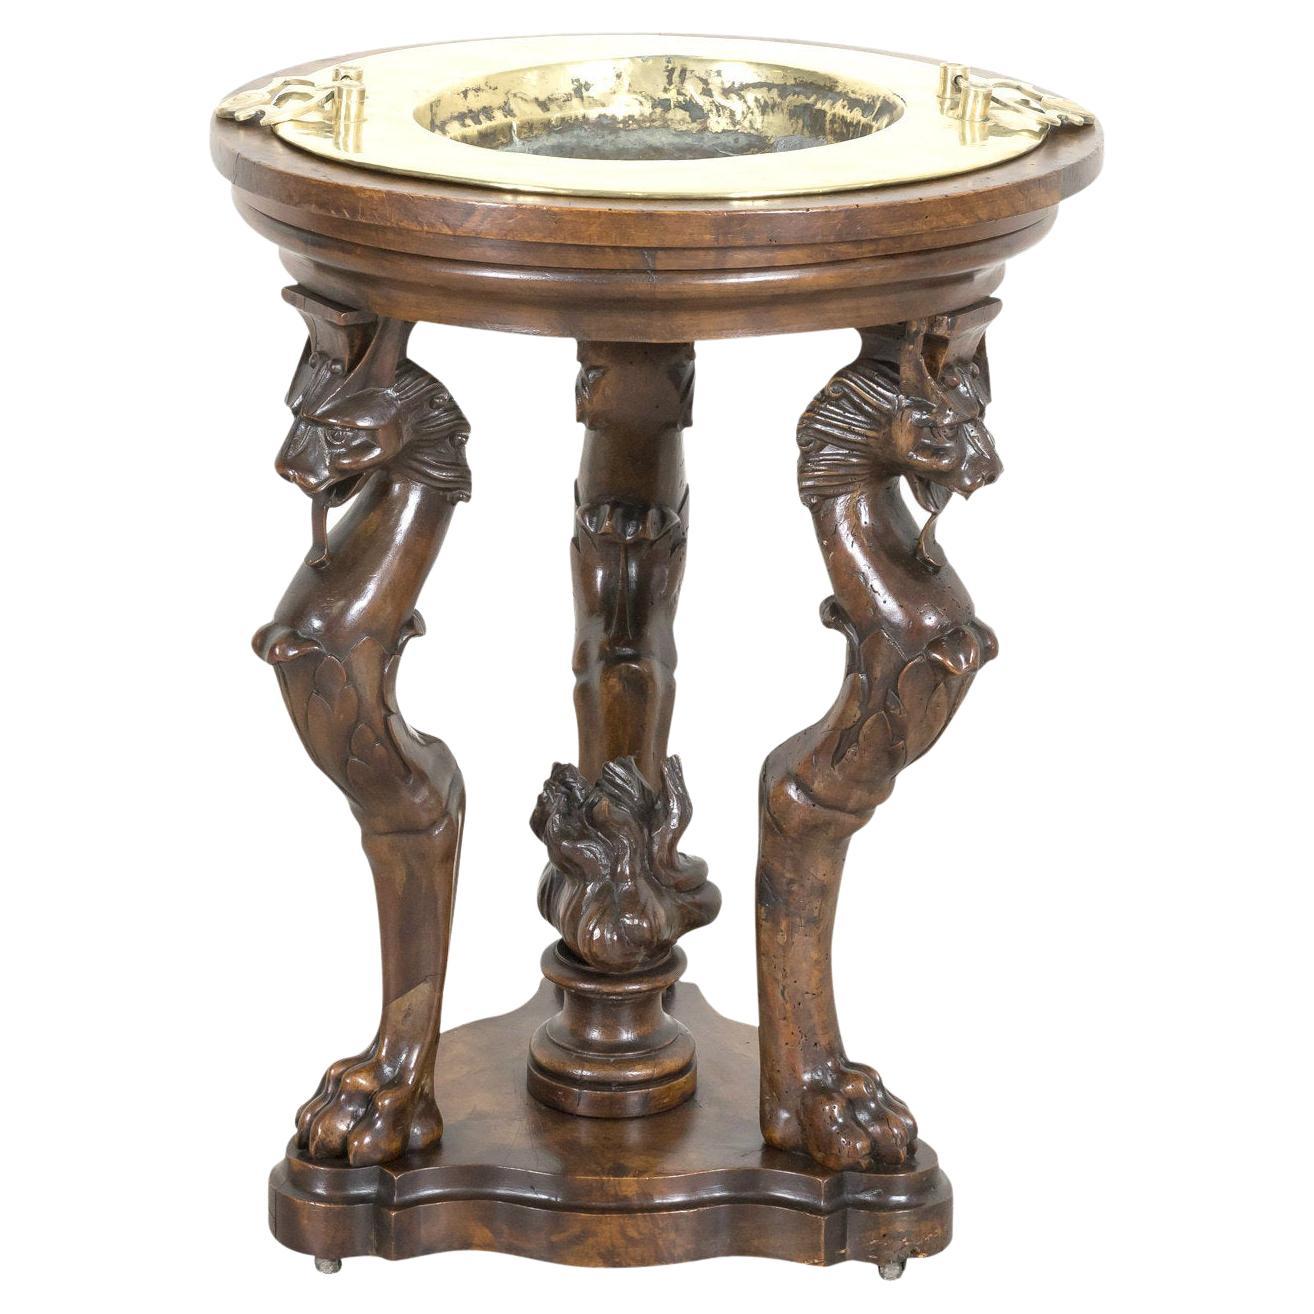 Early 19th Century French Restauration Period Carved Walnut Brazier Tripod Table For Sale